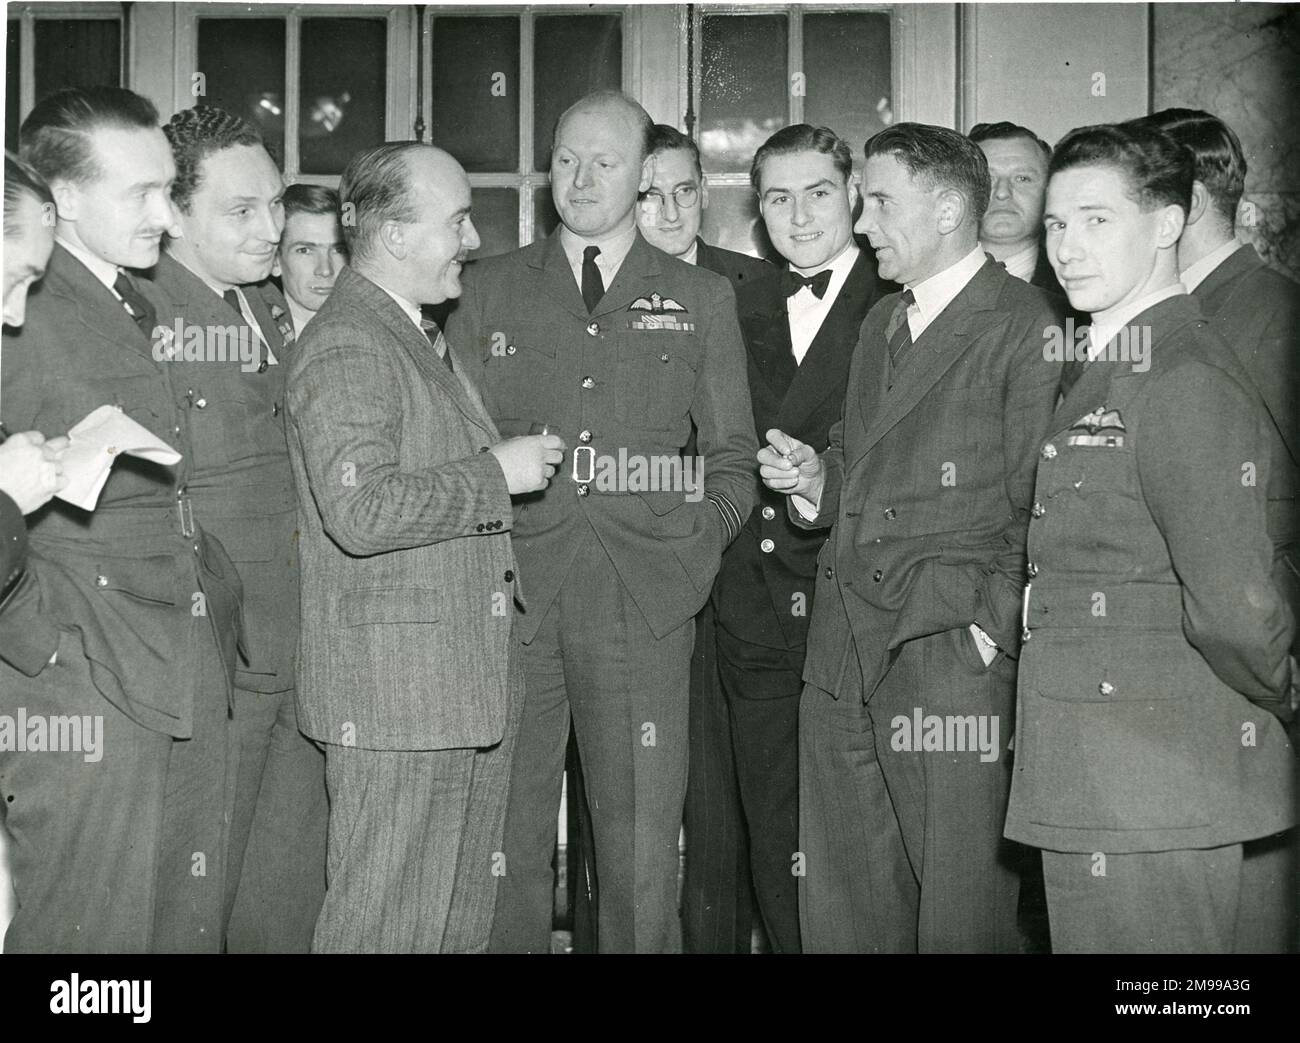 Students from No 6 Course Empire Test Pilots?s School toured the Avro factories on 15 and 16 December 1947 when they completed a series of visits to the aircraft manufacturers. Enjoying a cocktail before dinner are, from left: Sqn Ldr R.A. Watts, Flt Lt D.A. Dunlop, DSC, DFC; A.K. Cooke, Avro Test Pilot; Sqn Ldr K.J. Sewell, AFC, DFM, Tutor-Flying ETPS; Lt R.H. Reynolds, DSC, J.M. Orrell, Avro Chief Test Pilot; and Flt Lt G.S. Chandler. Stock Photo